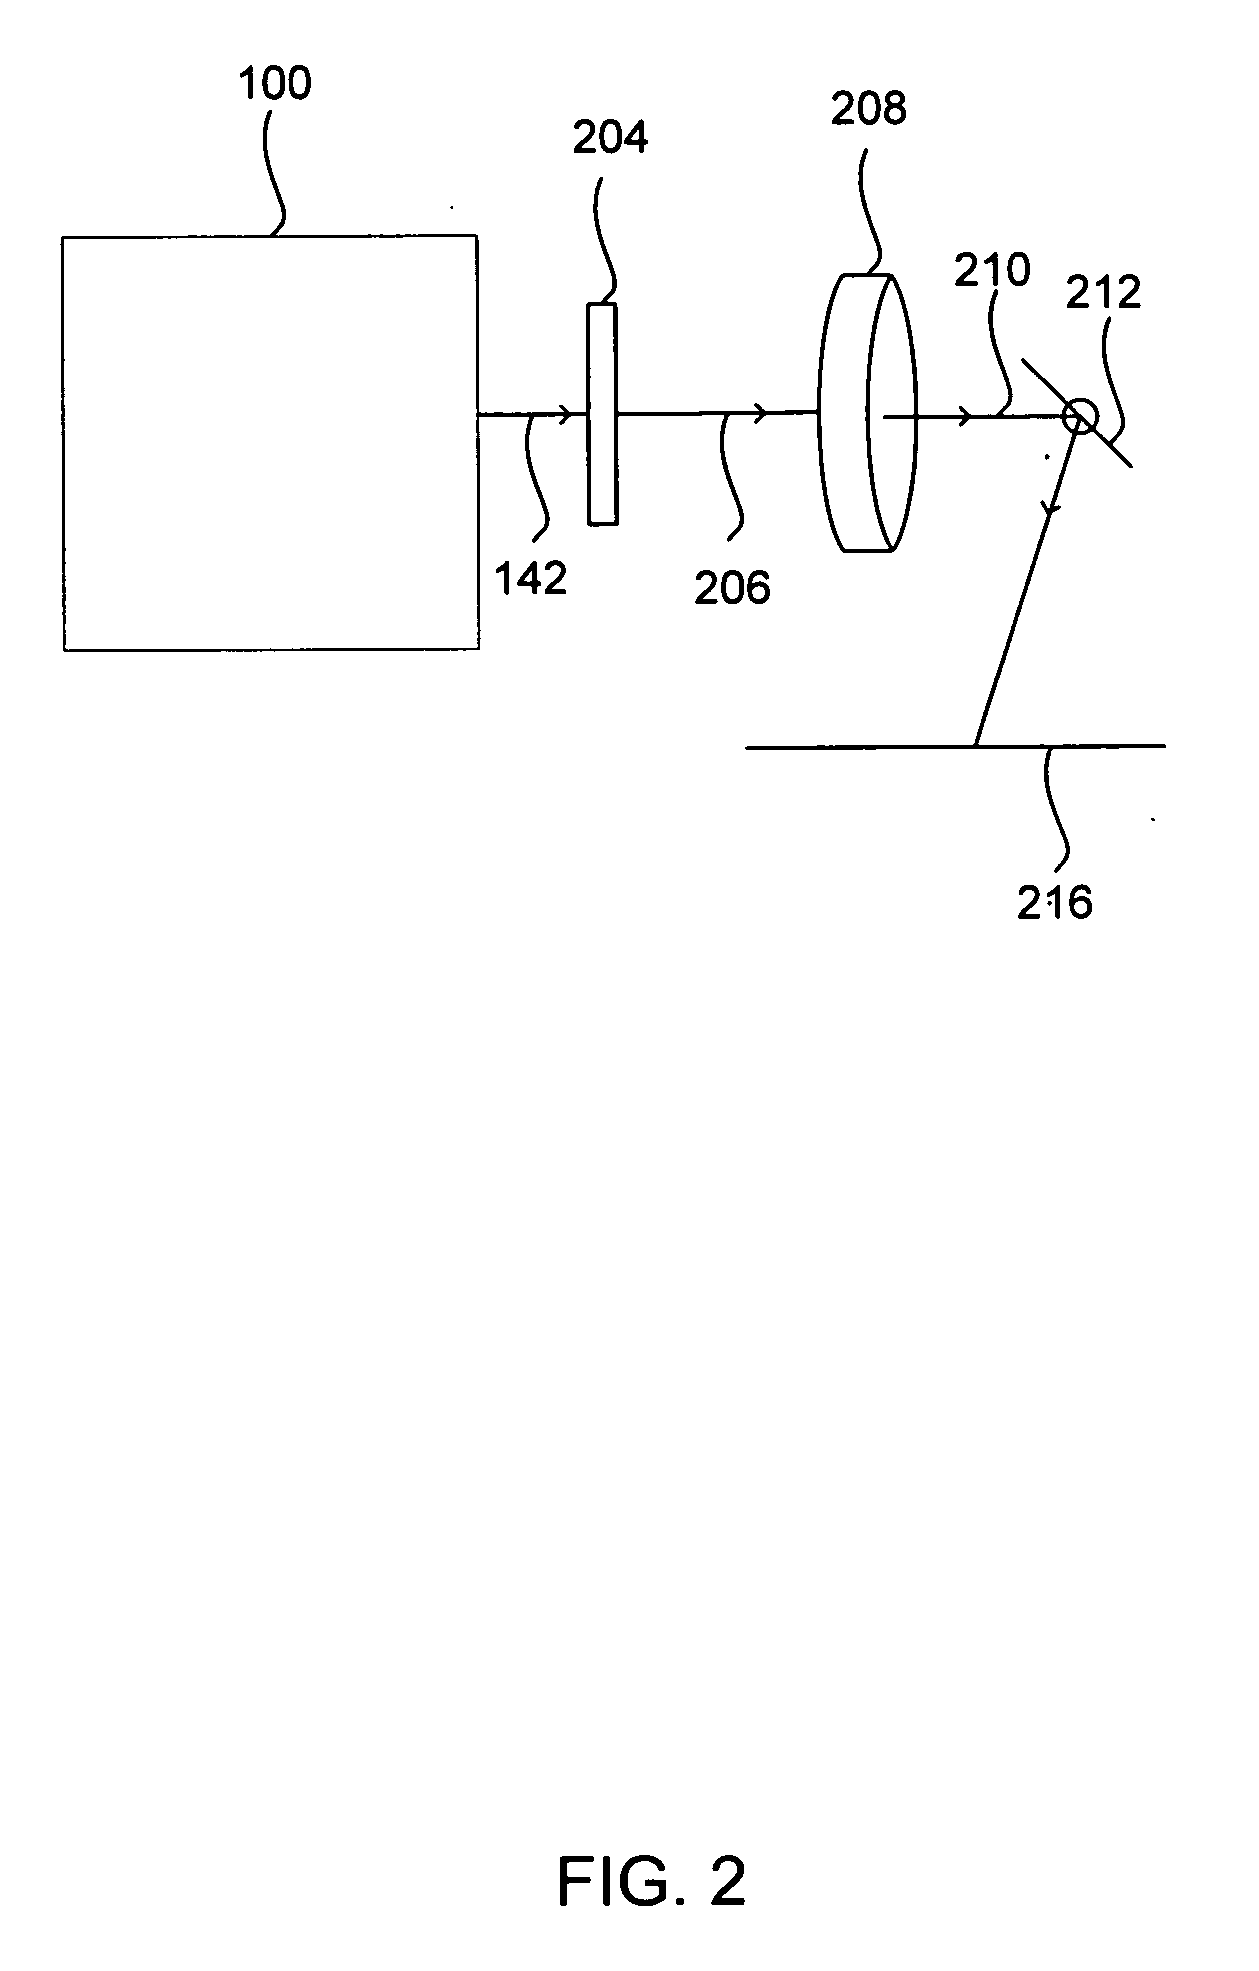 Reduction of speckle and interference patterns for laser projectors